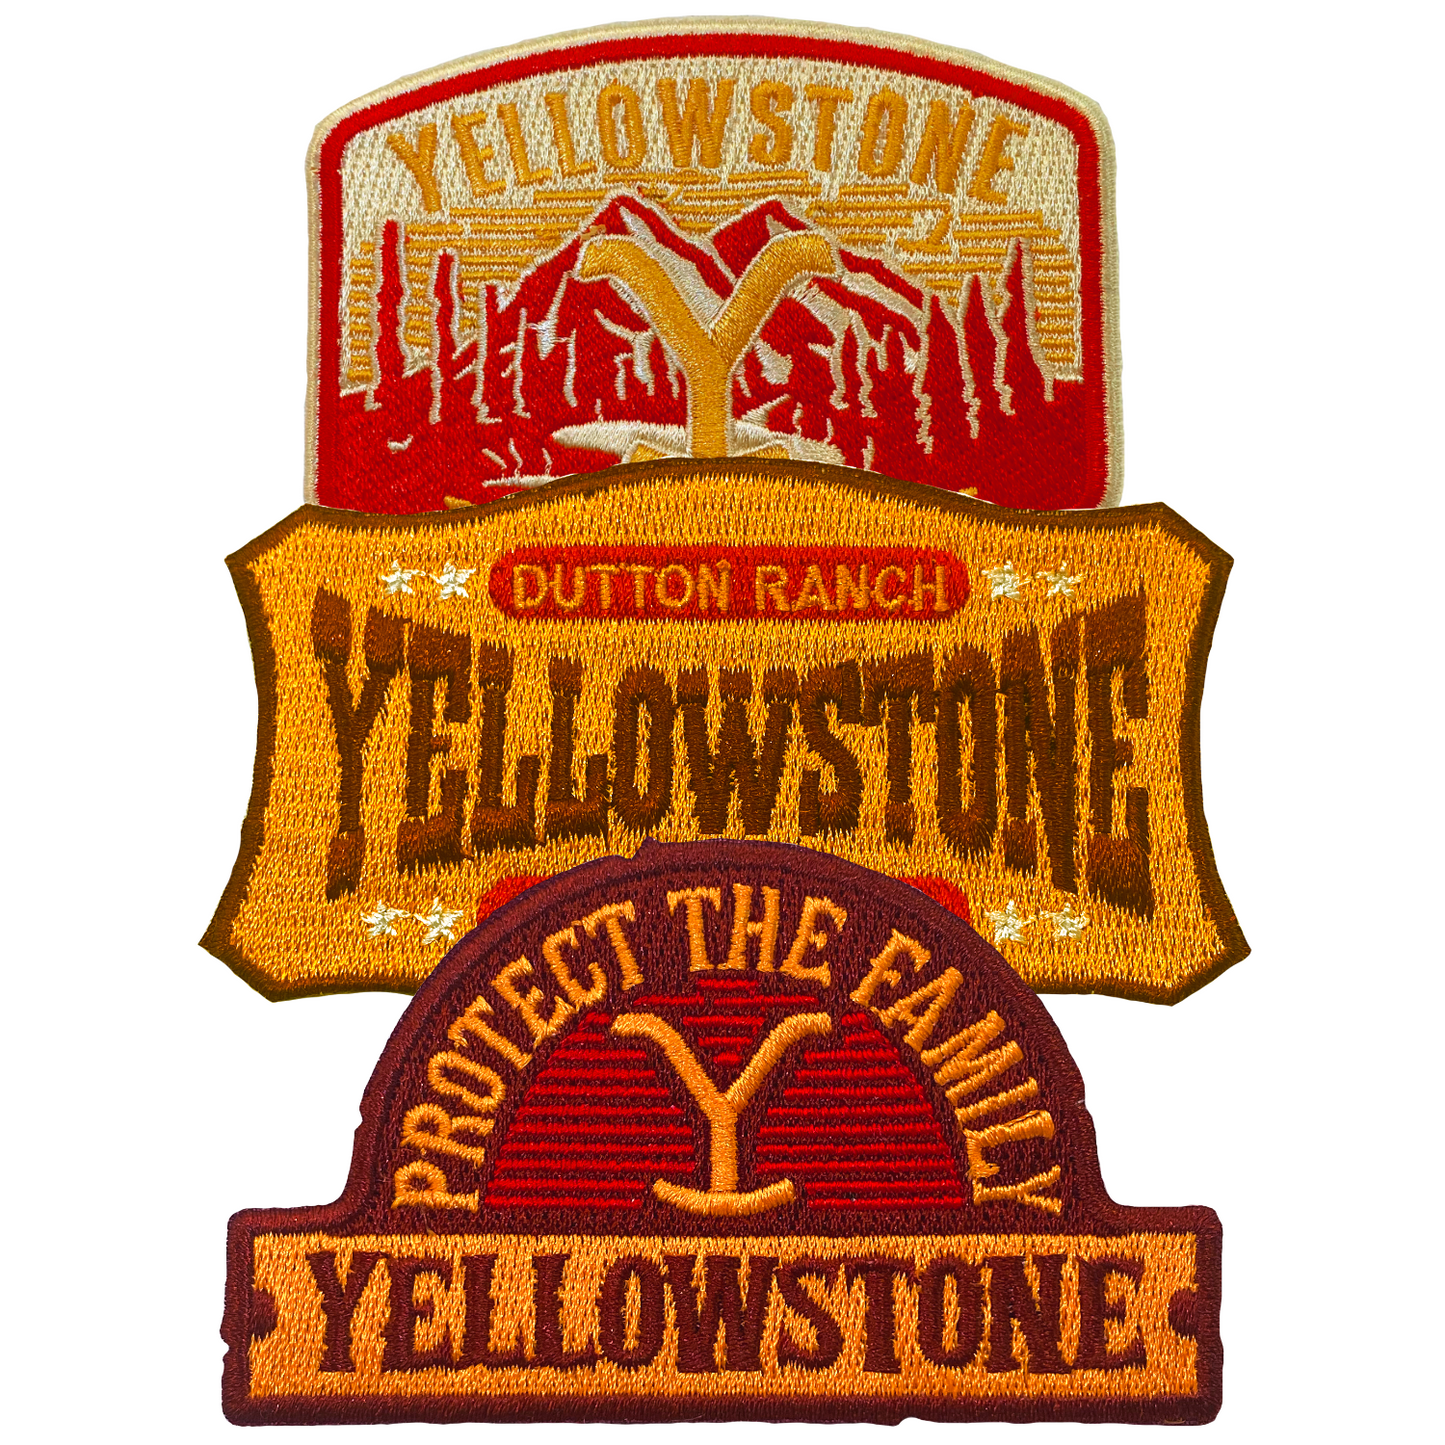 Yellowstone Dutton Ranch Iron On Patches - Pack of 3